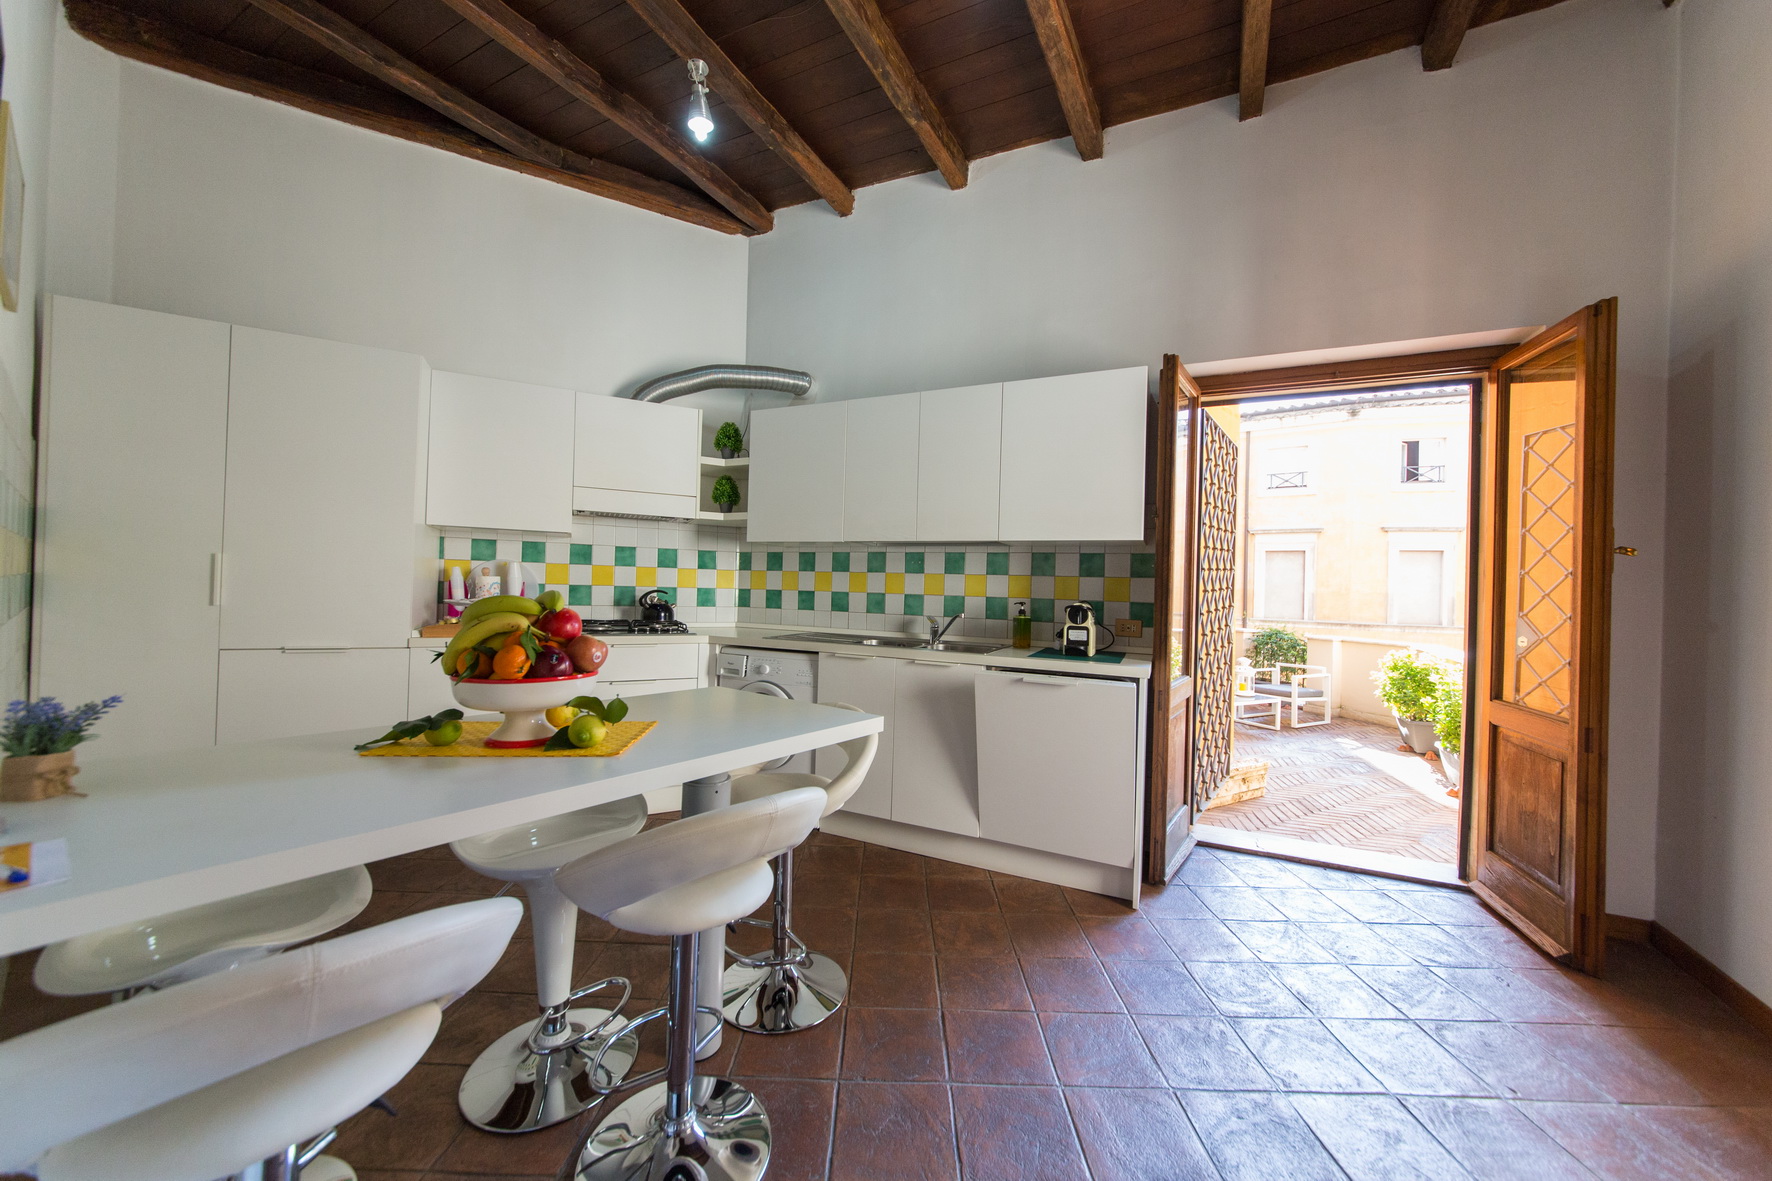  Kitchen with terrace